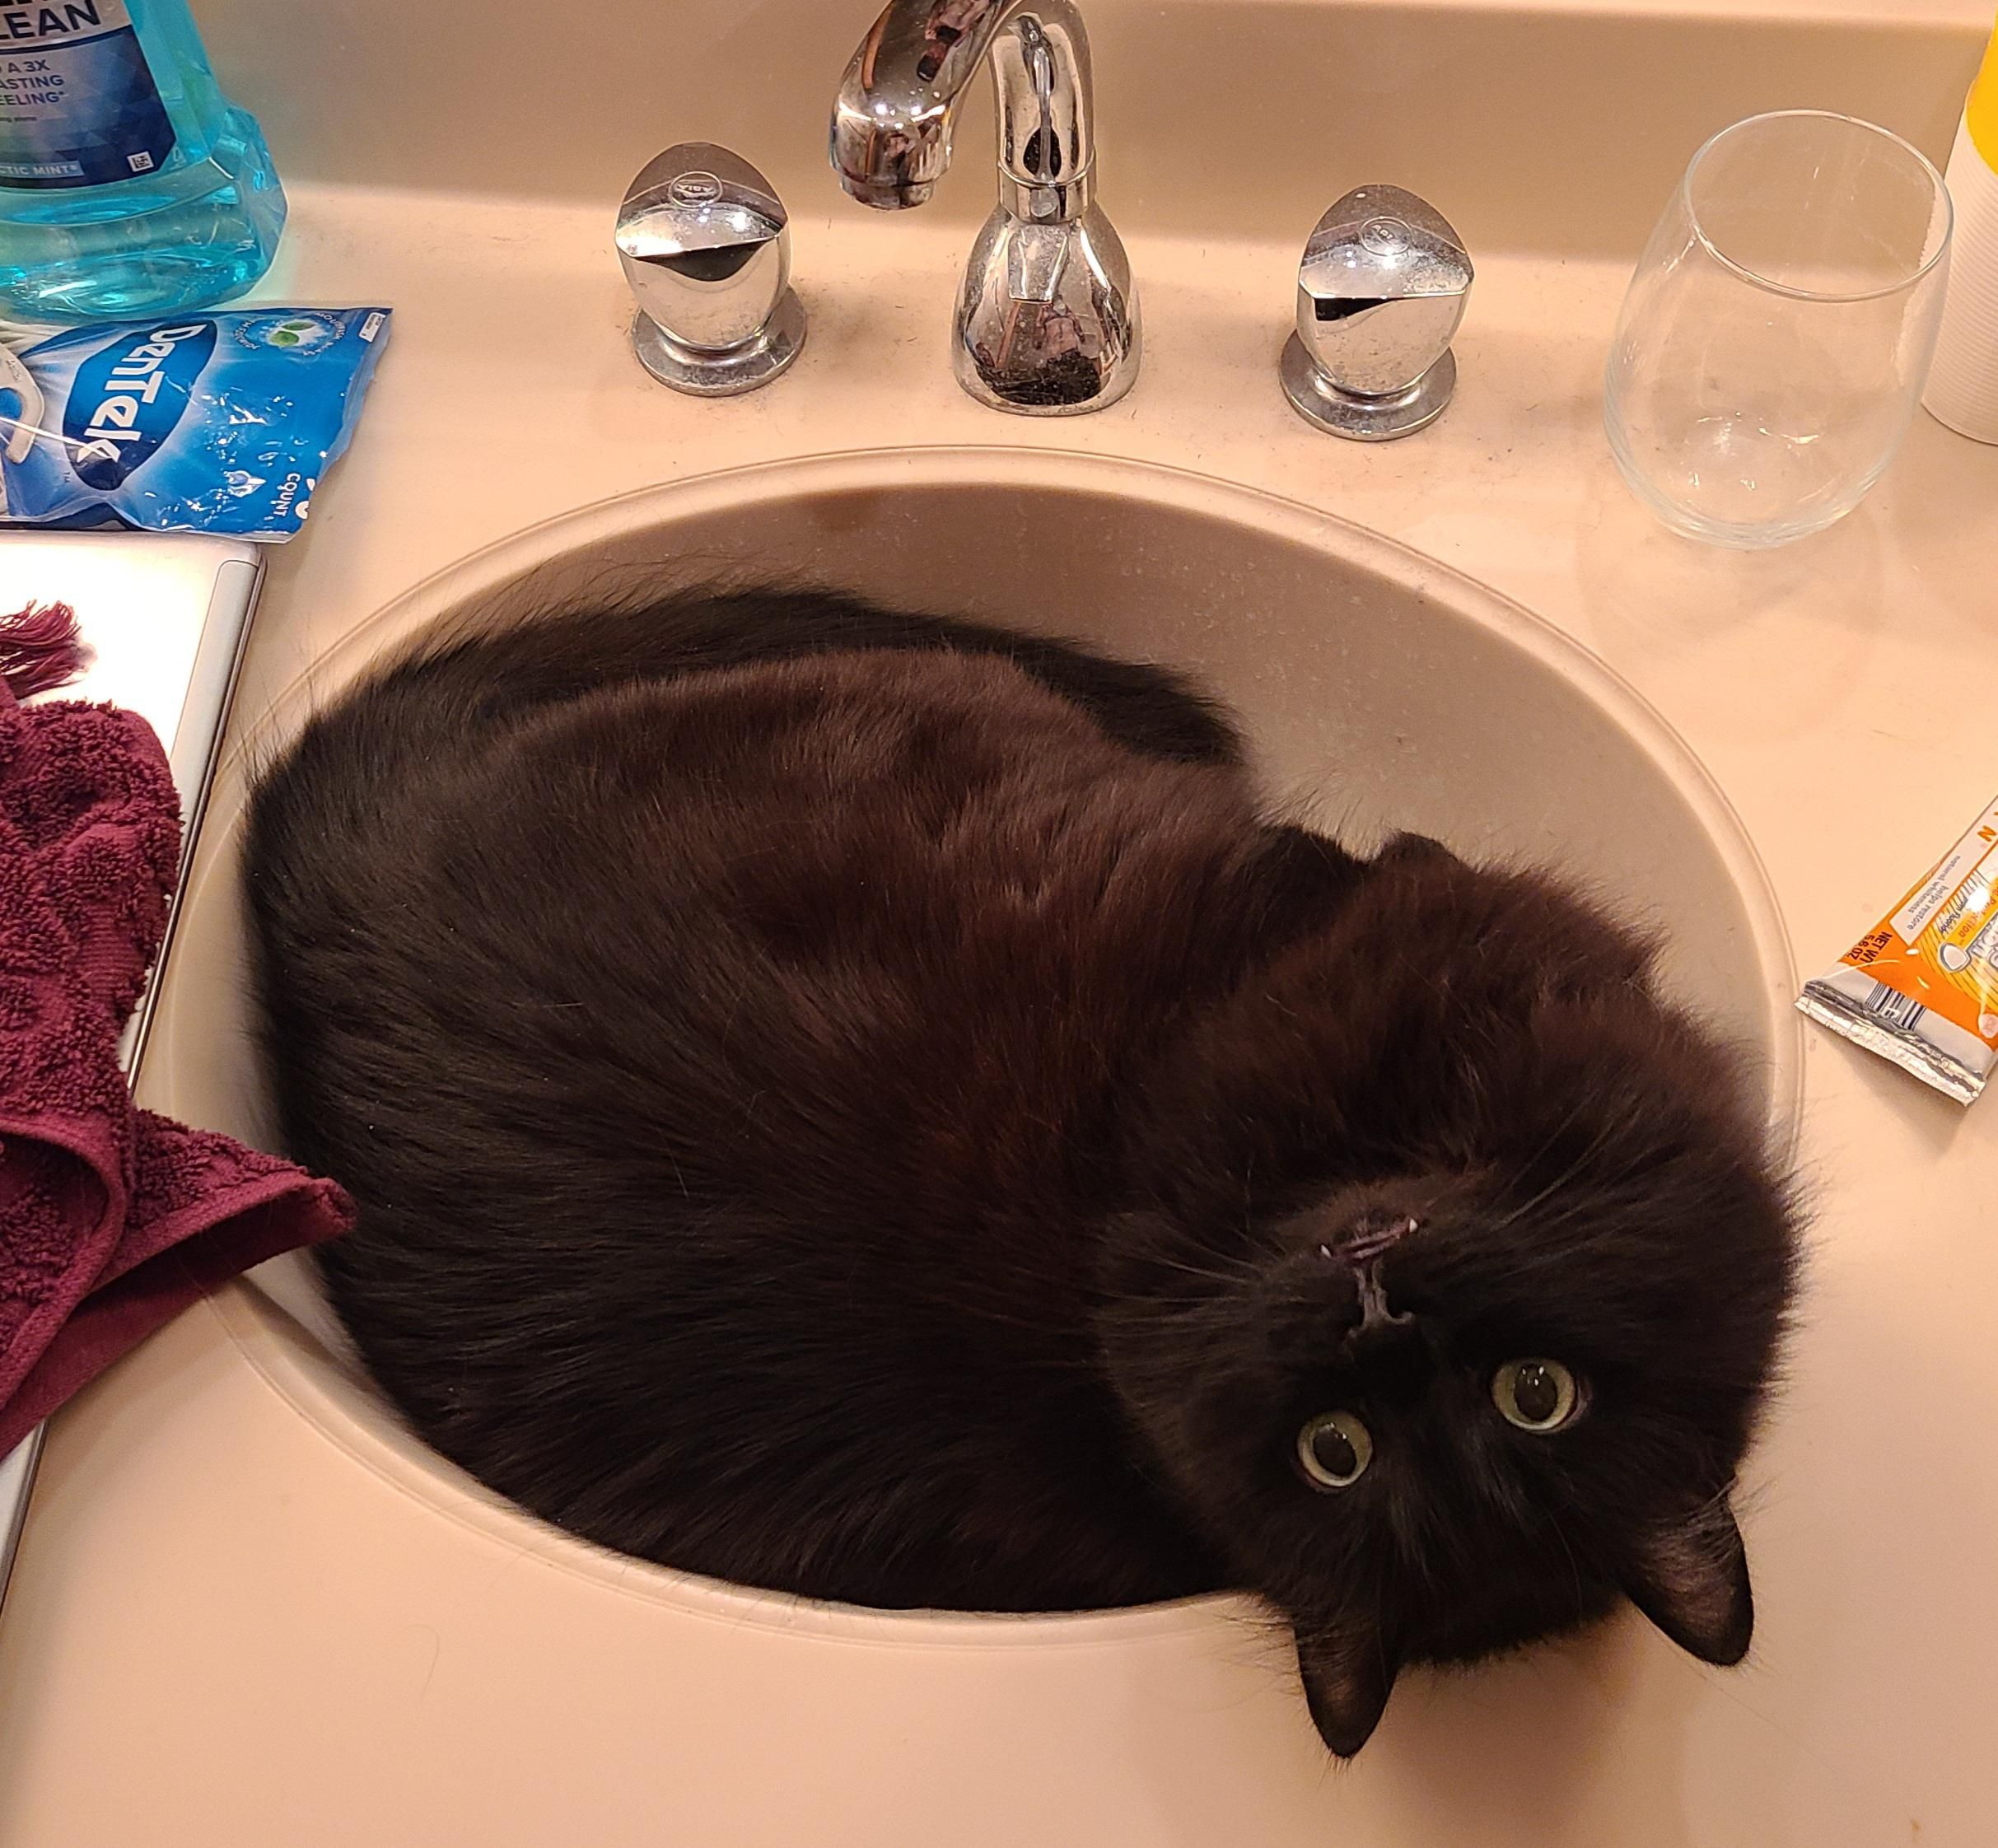 Sink is clogged with hair again!